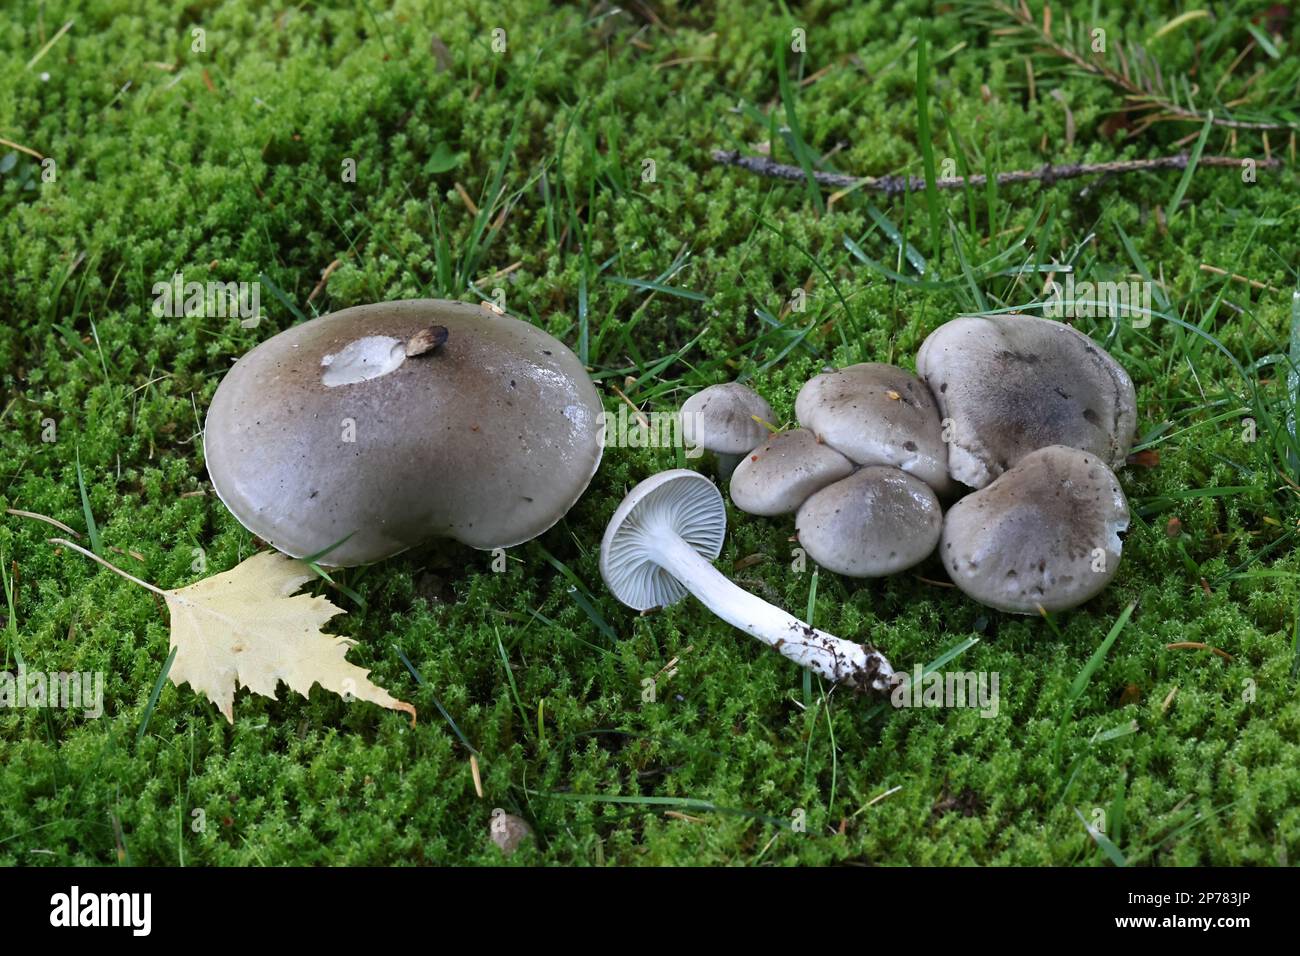 Hygrophorus agathosmoides, commonly known as the gray almond waxy cap or the almond woodwax, wild mushroom from Finland, Stock Photo